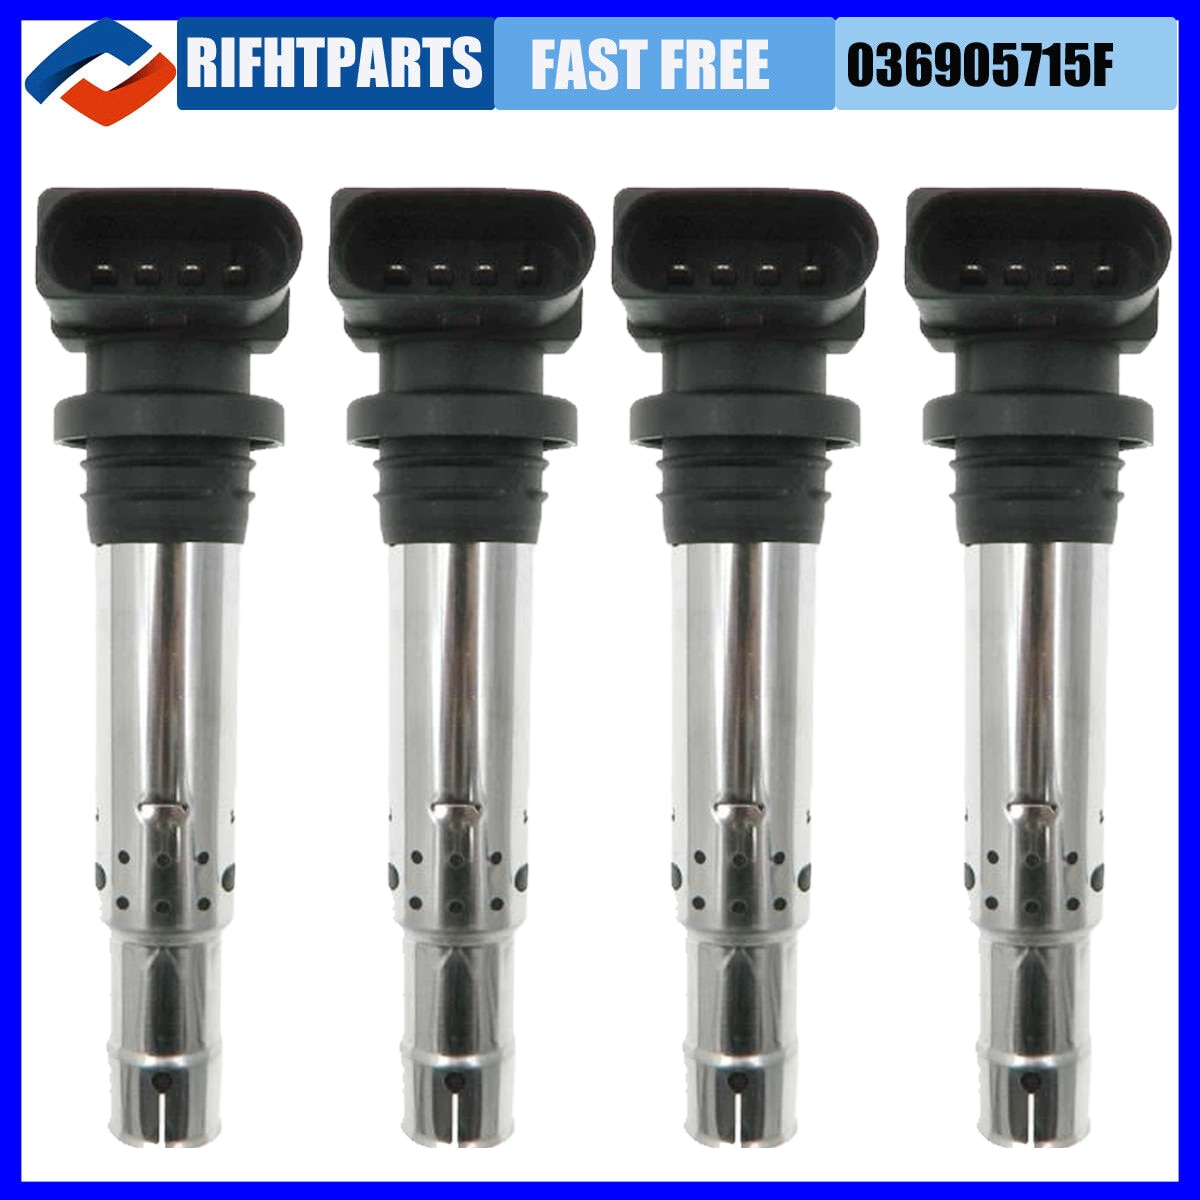 RIGHTPARTS 036905715F 036905715H Car Ignition Coils For VW Jetta Golf Passat  Beetle Polo Audi Skoda 036905715 036905715G